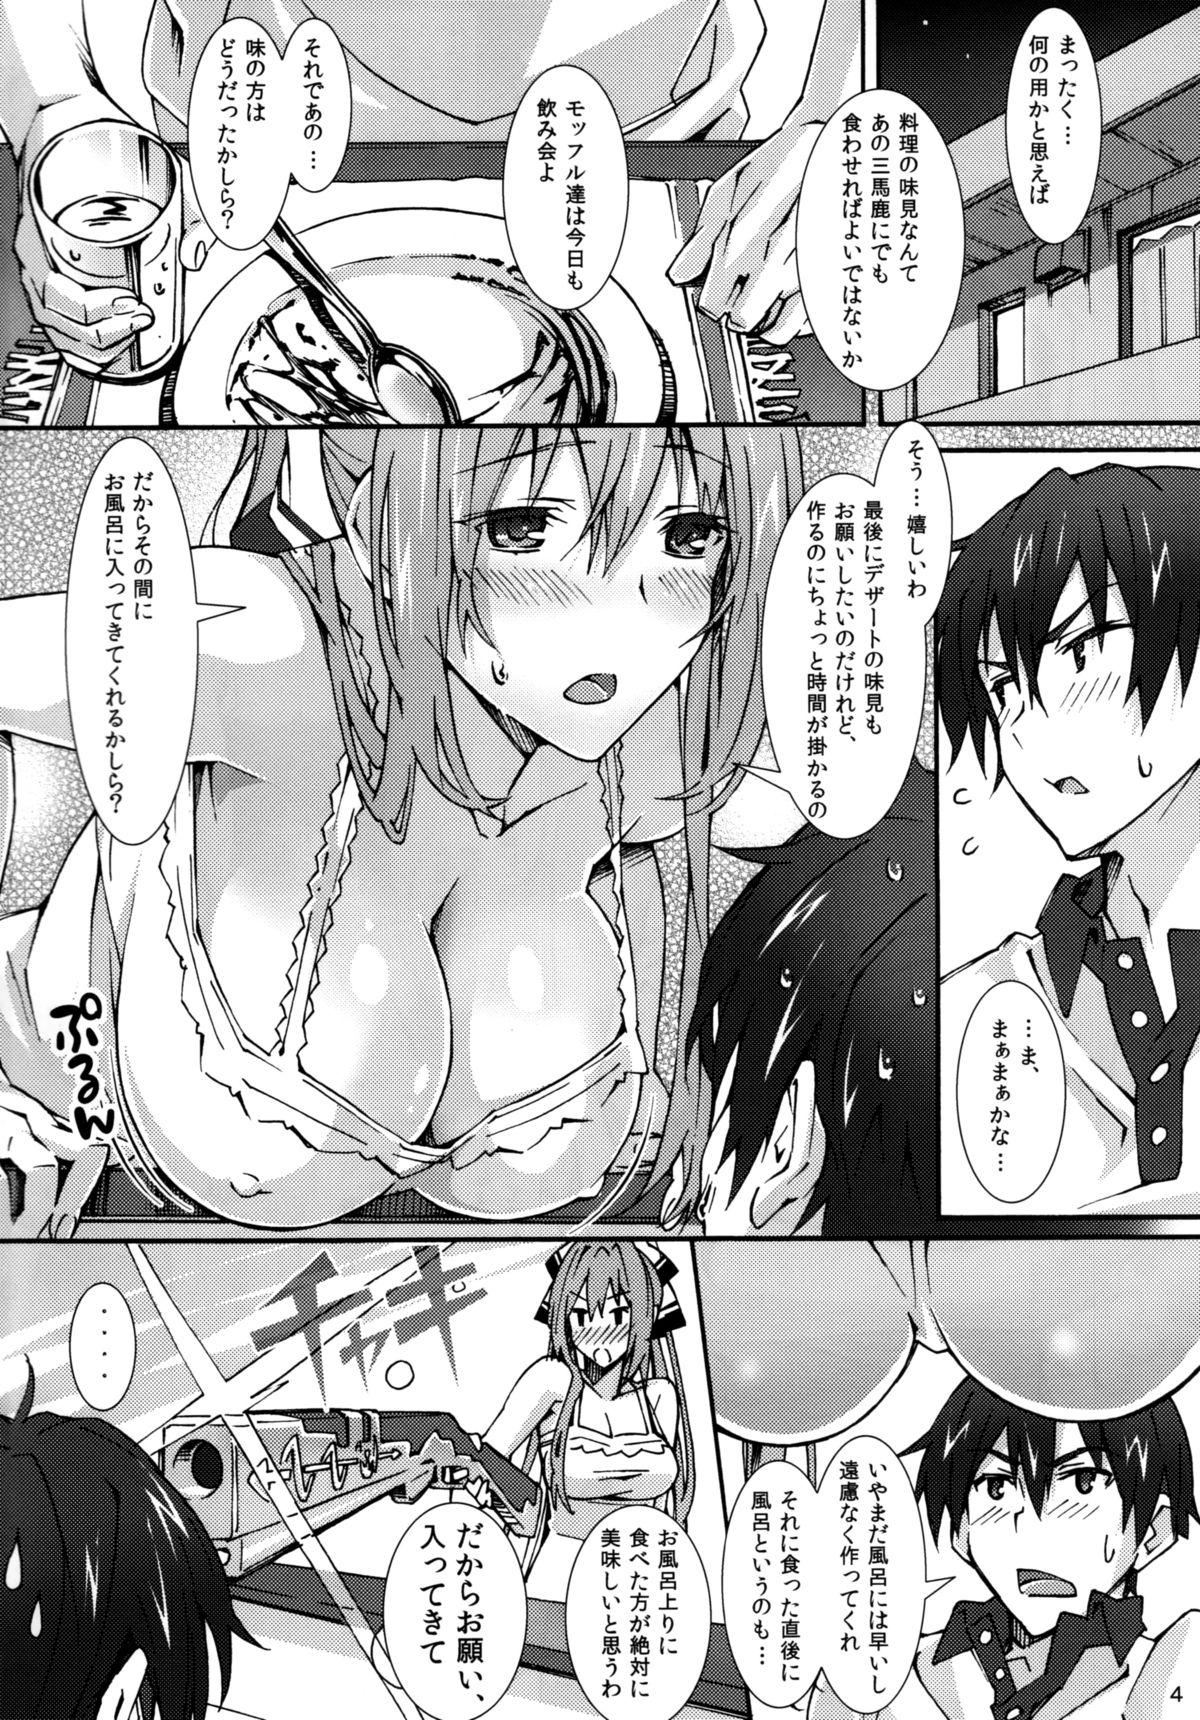 Stunning Real Intention - Amagi brilliant park Interracial Sex - Page 4